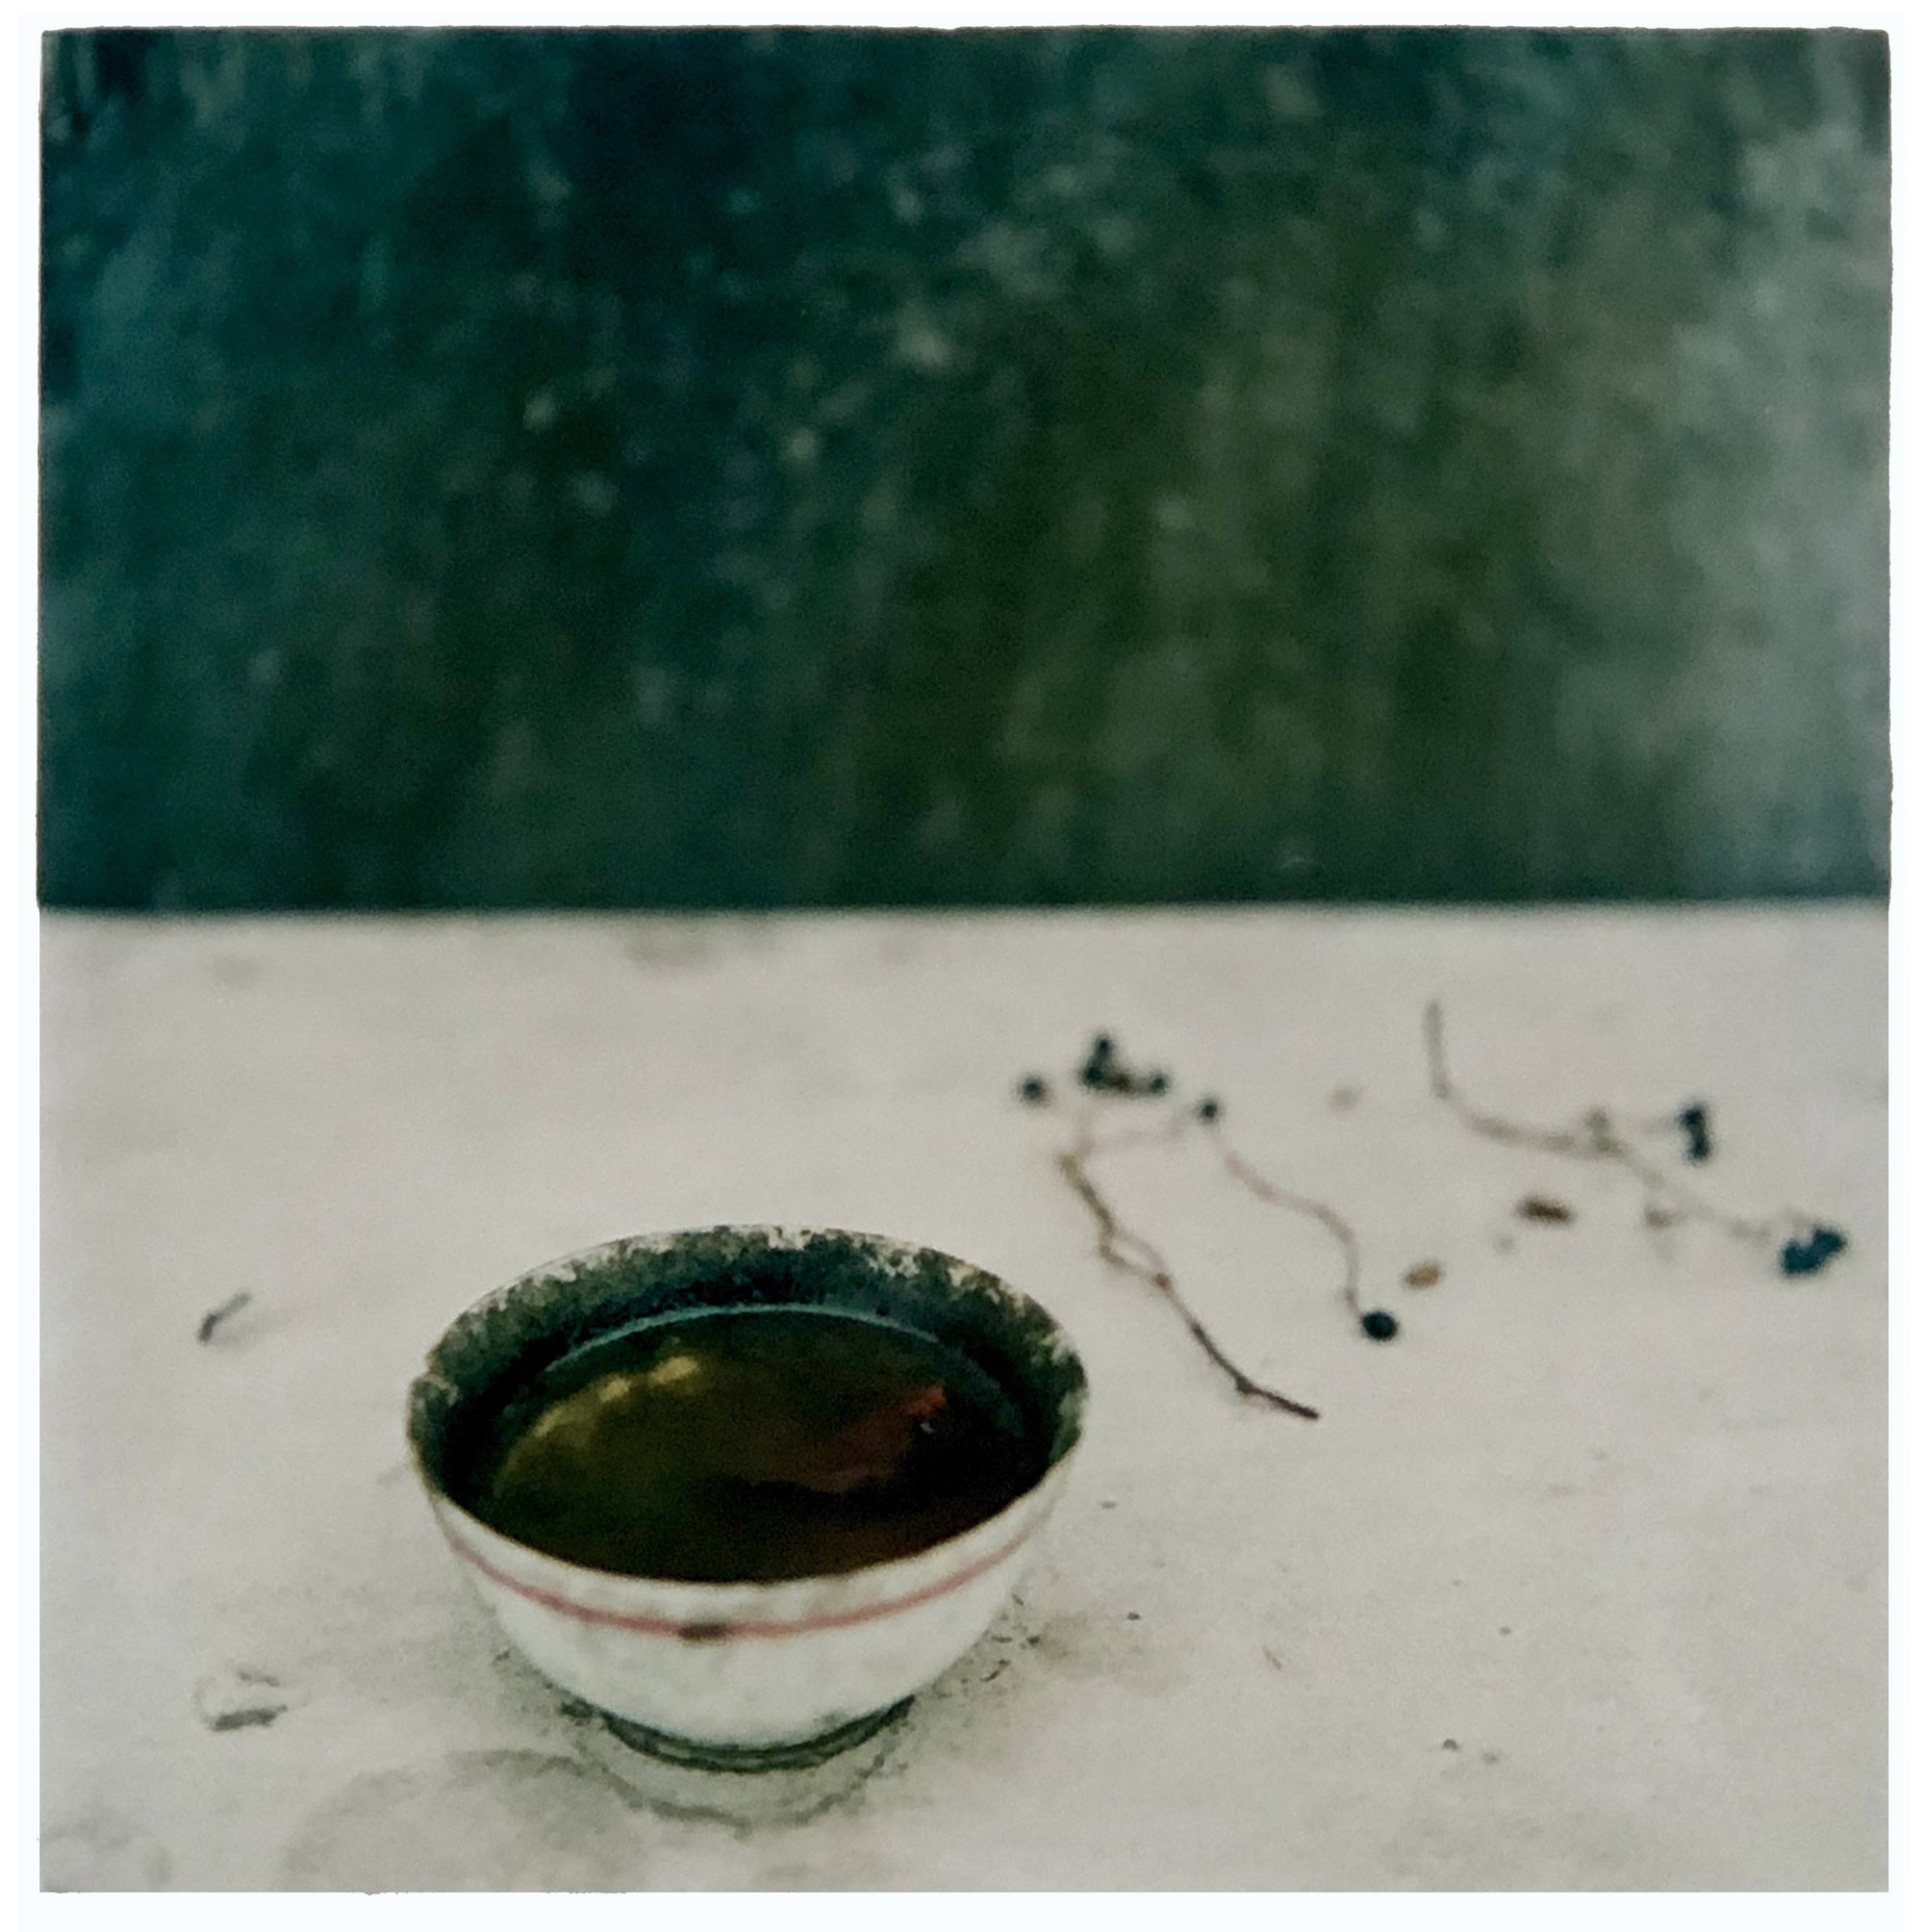 'Rice Bowl' was captured in the final years of British Hong Kong, in a colonial home on the Peak. This delicate still life artwork, made up equally of neutral tones and a beautiful deep green, is a subtle depiction of Yin and Yang.